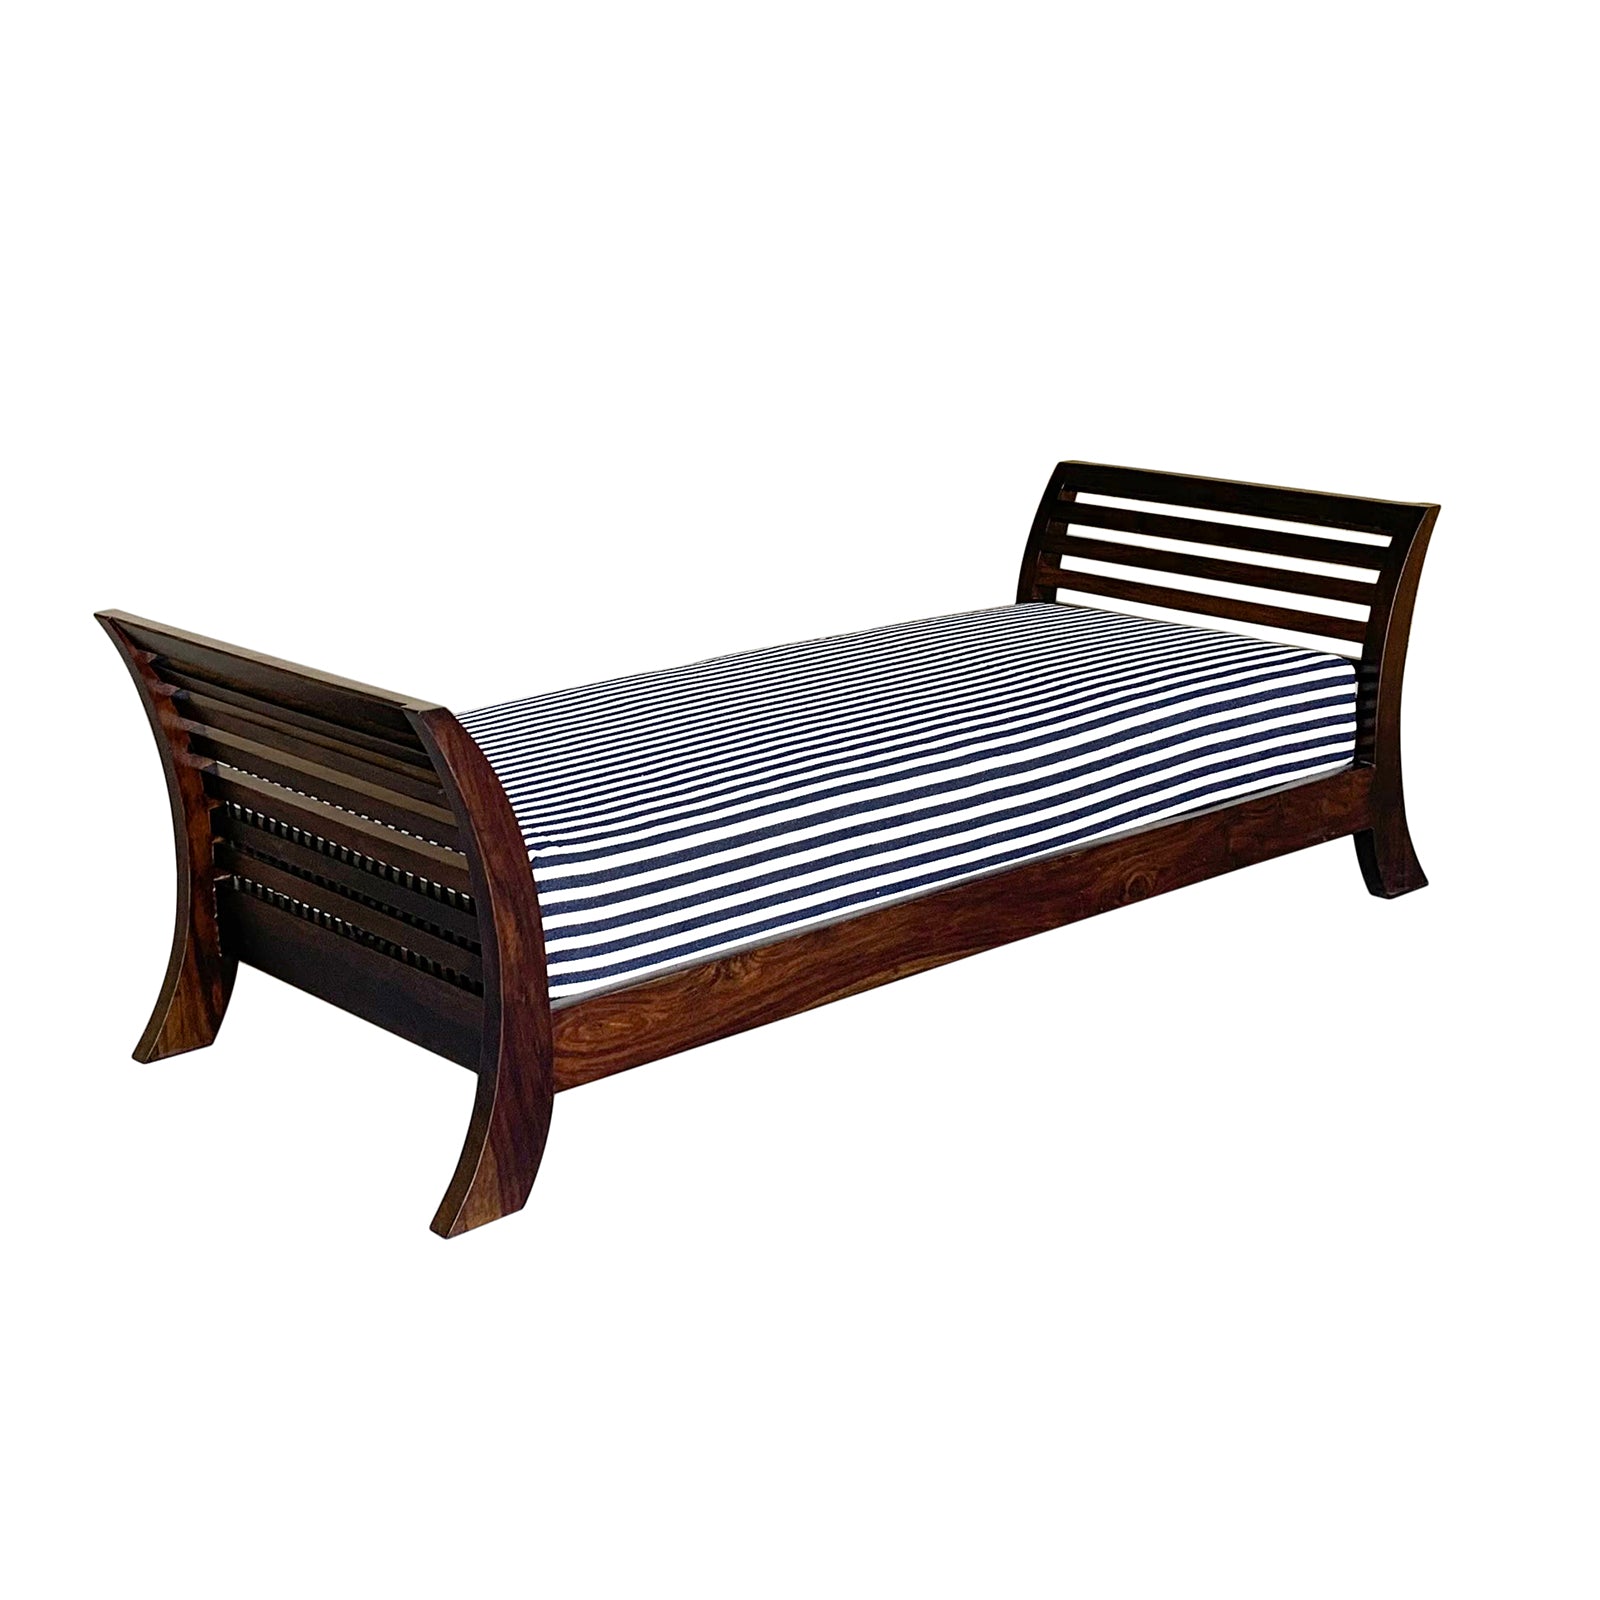 Latest Beds online